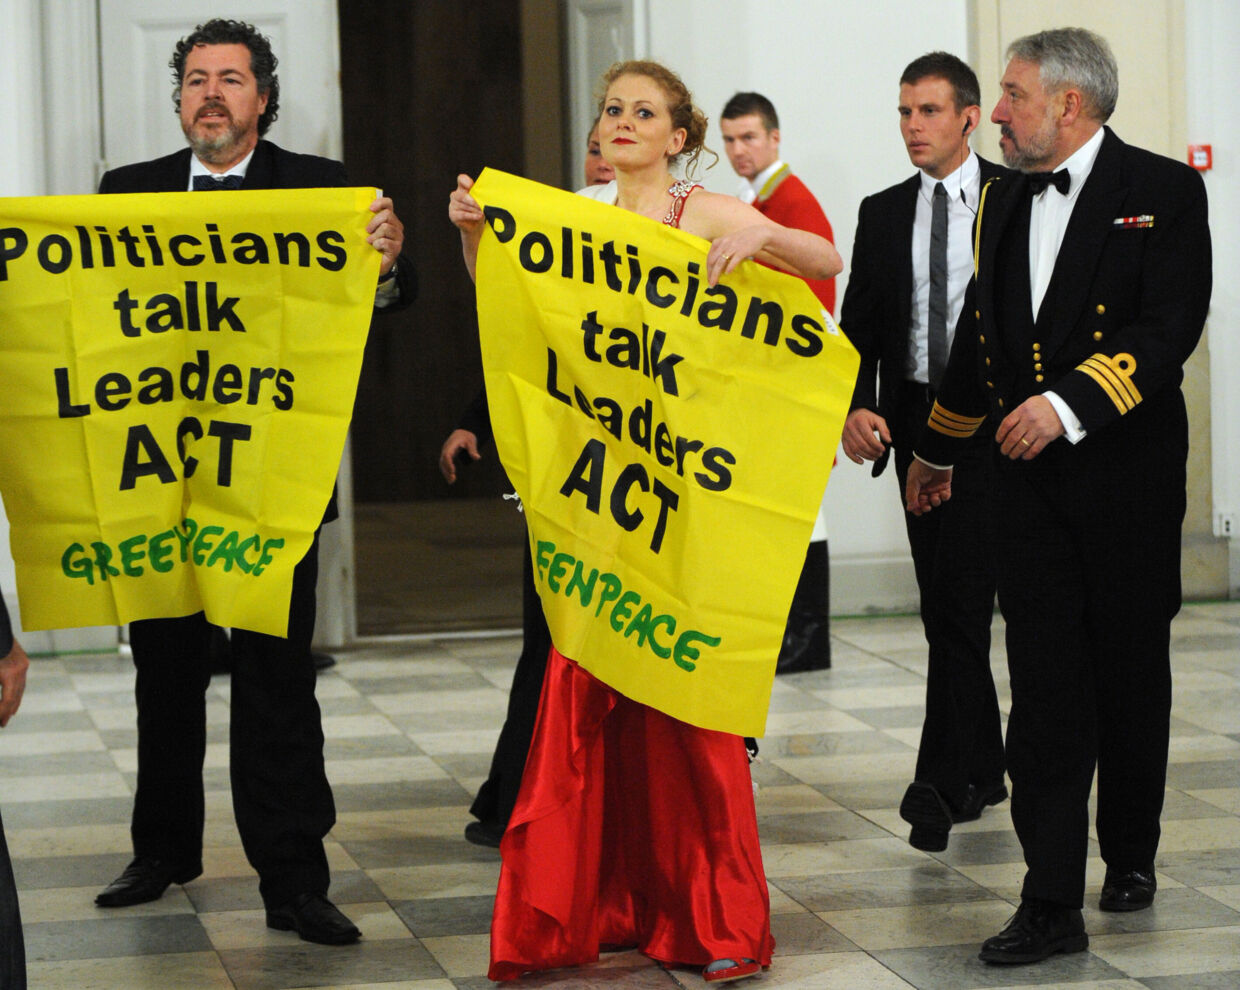 Greenpeace activists unfold a banner distrurbing the arrival of heads of states for the official dinner hosted by Denmark's Queen Margrethe II  in Copenhagen on December 17, 2009 on the 11th day of the COP15 UN Climate Change Conference.     AFP PHOTO POOL/ ERIC FEFERBERG
